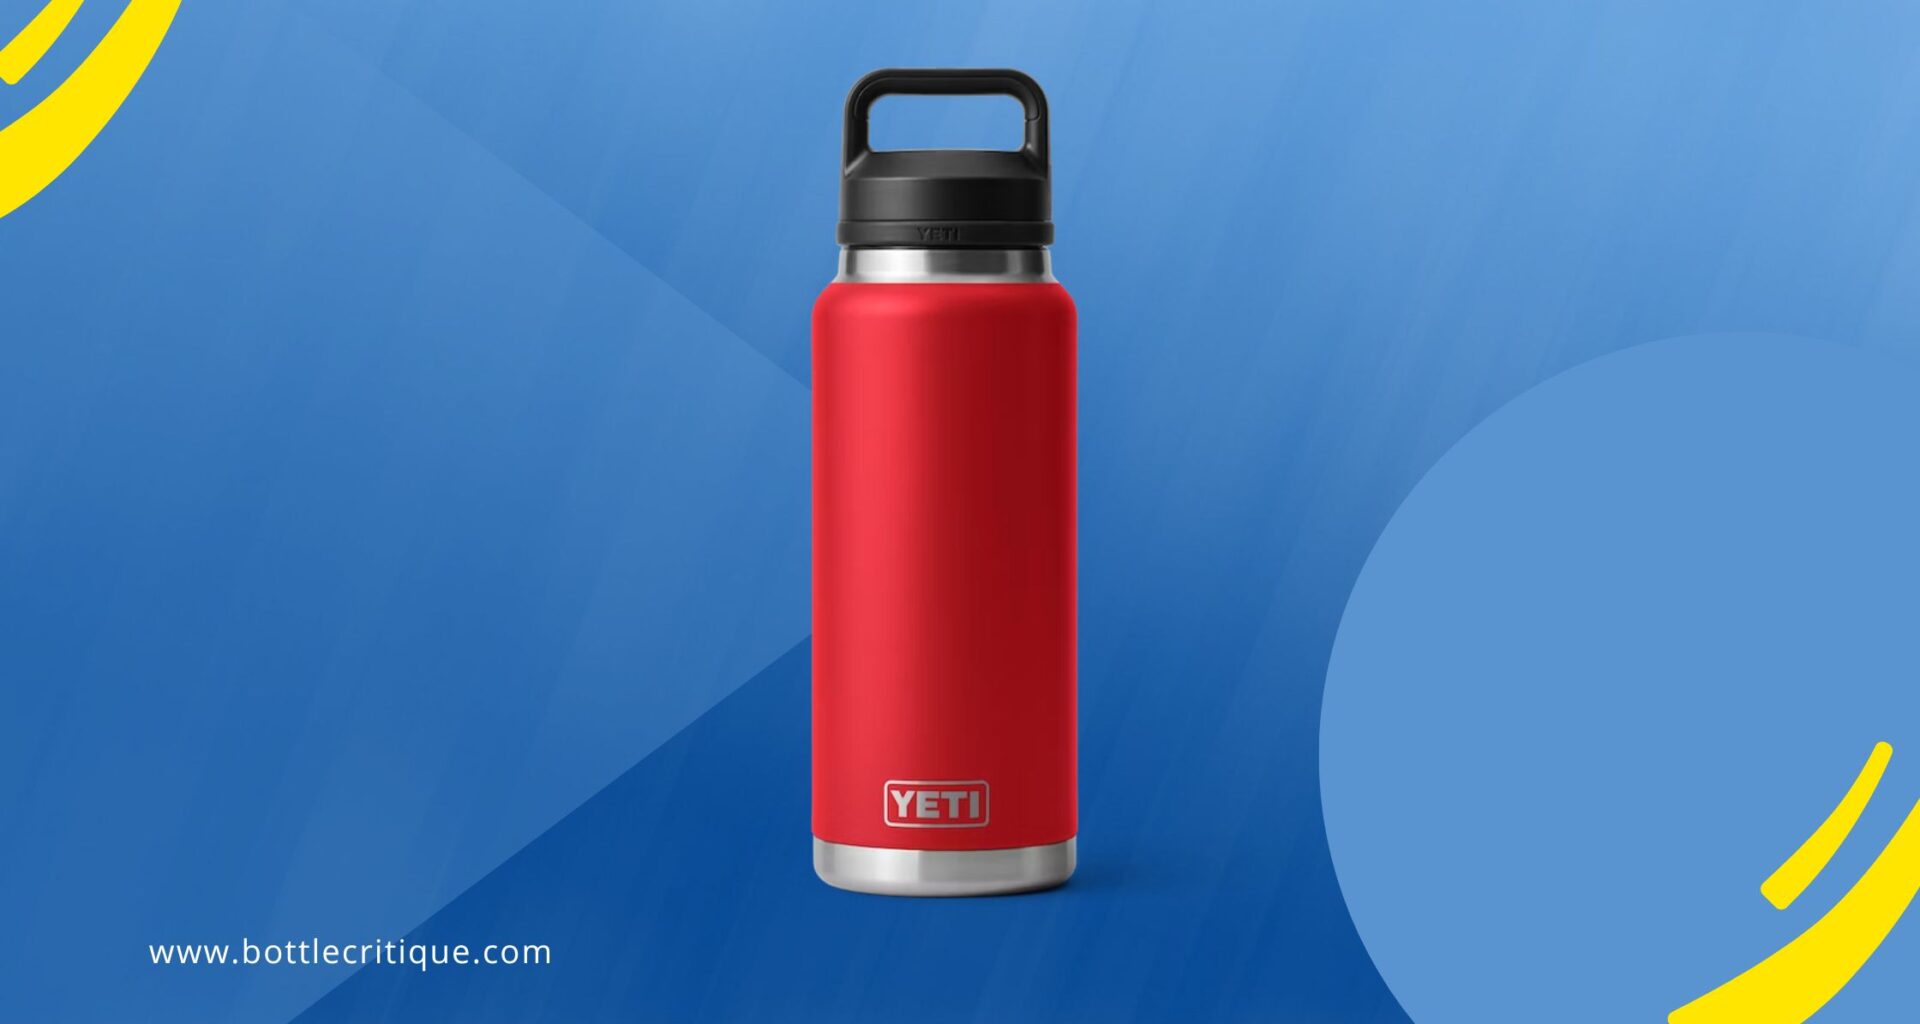 Yeti Water Bottle With Name Engraved – Personal Hydration